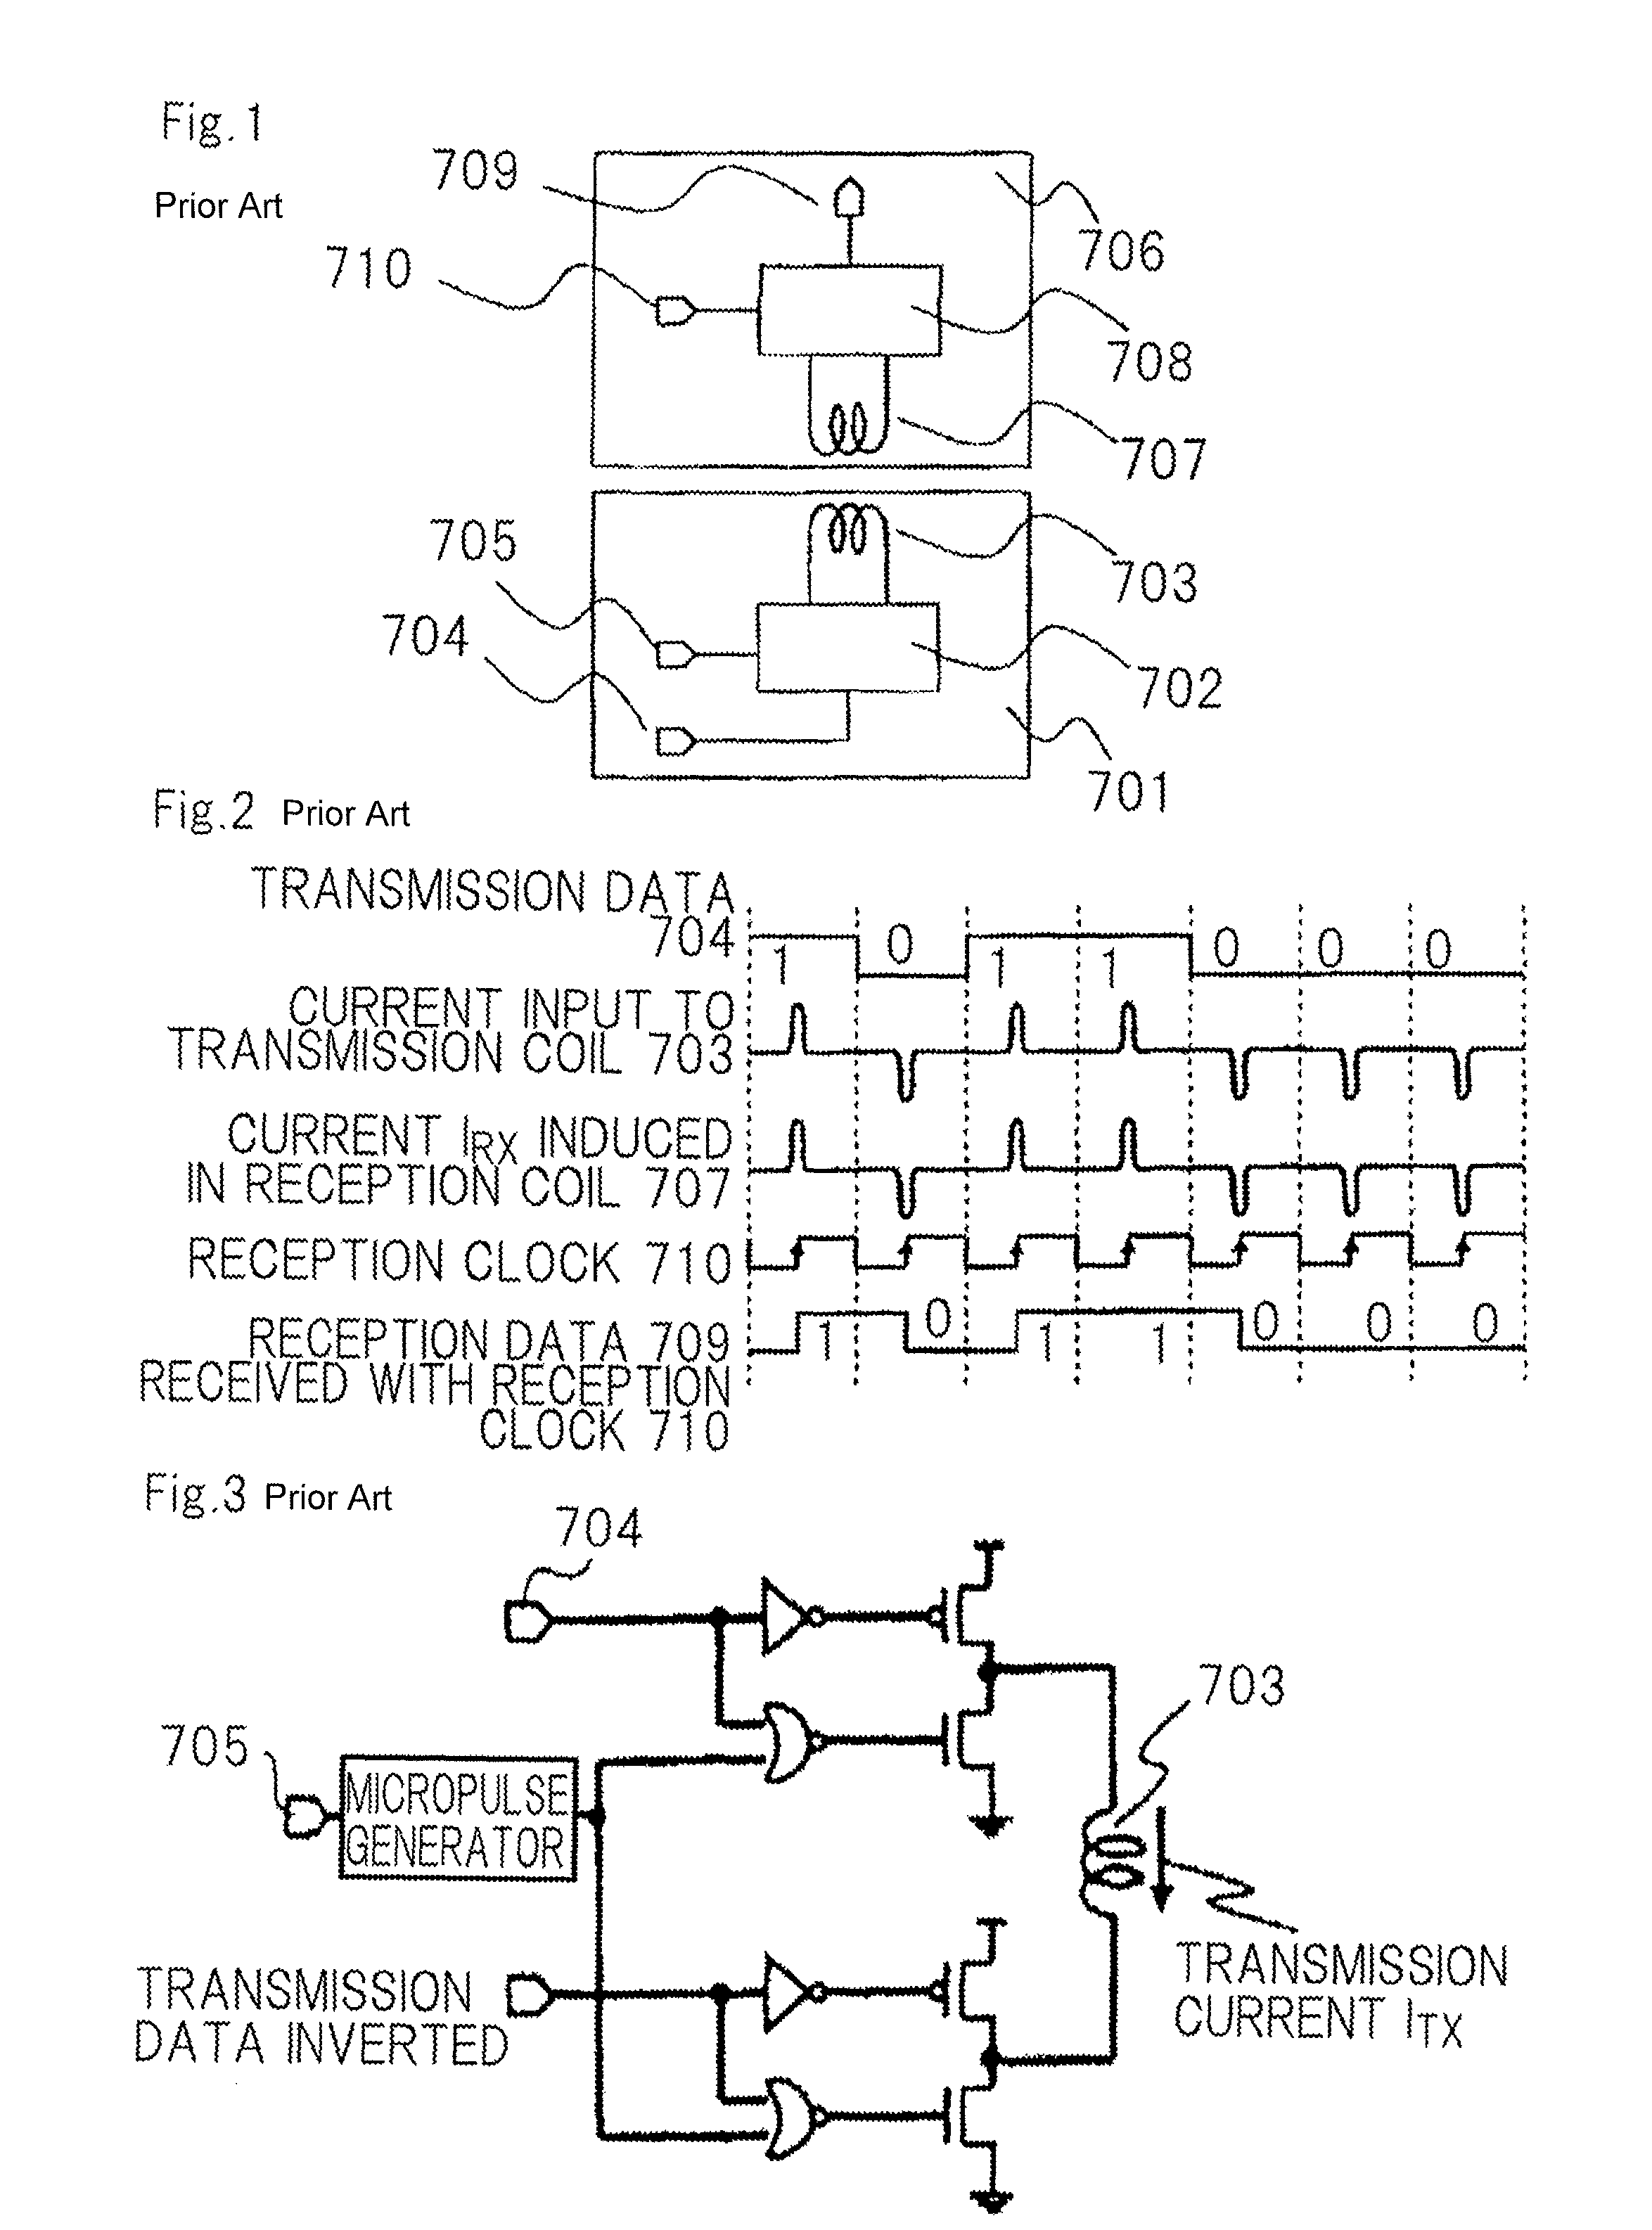 Semiconductor device performing signal transmission by using inductor coupling